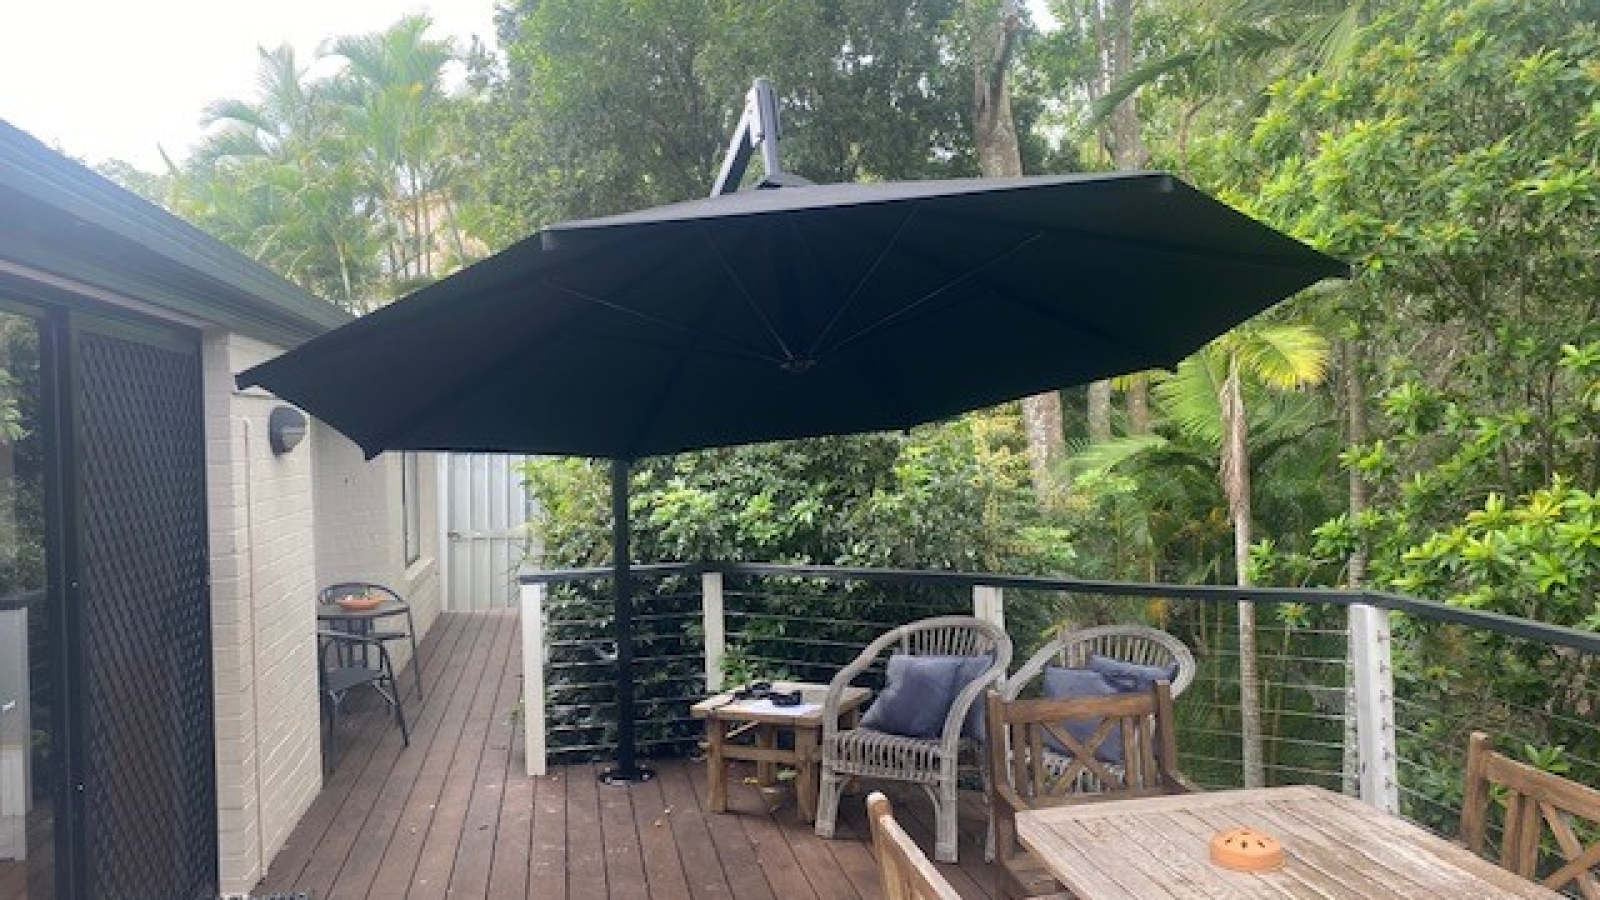 Transforming Your Patio with a High-Quality Giant Umbrella